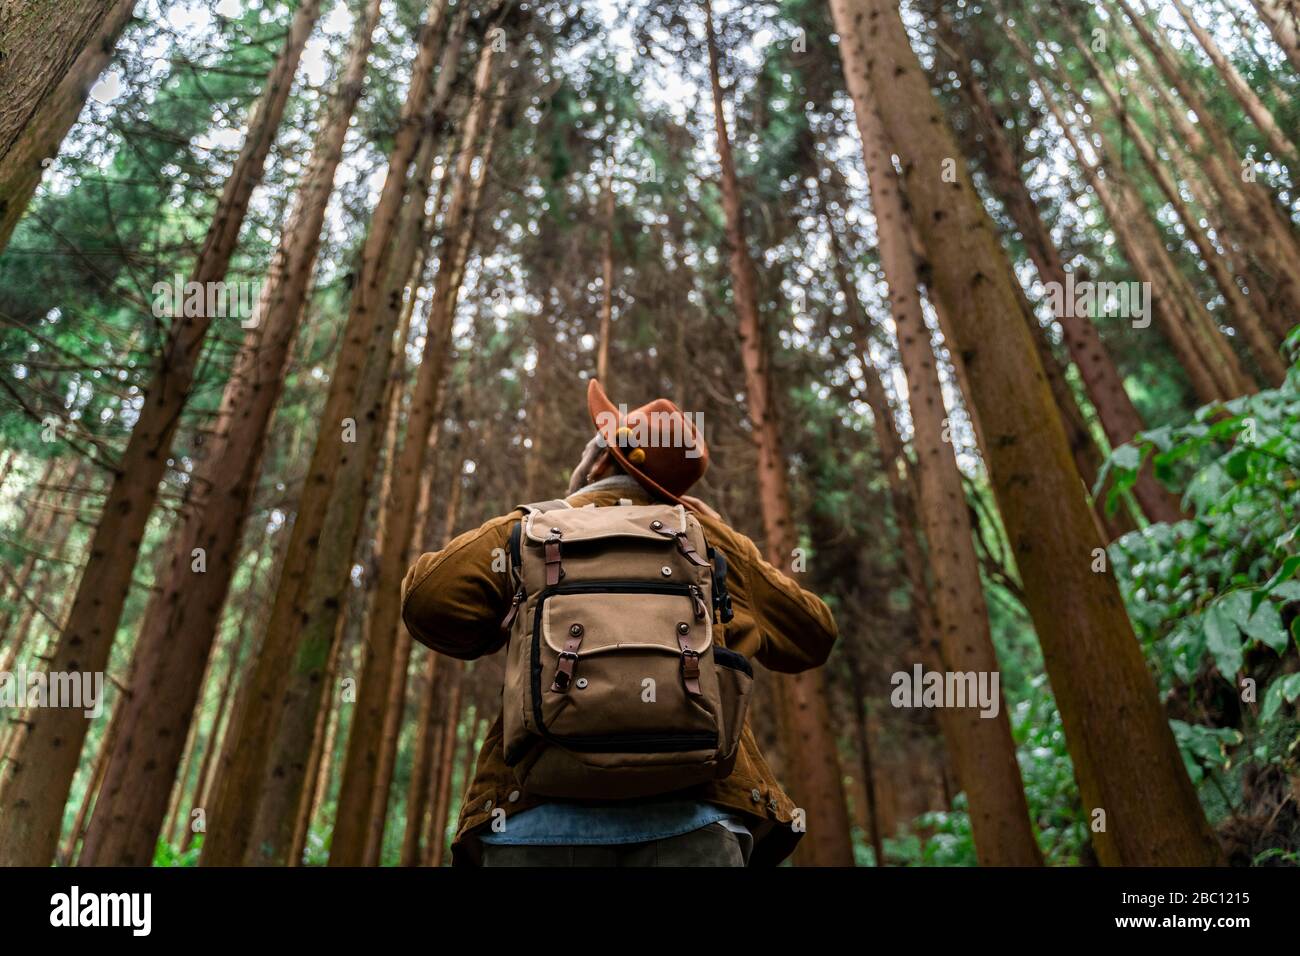 Man standing in forest surrounded by trees, Sao Miguel Island, Azores, Portugal Stock Photo